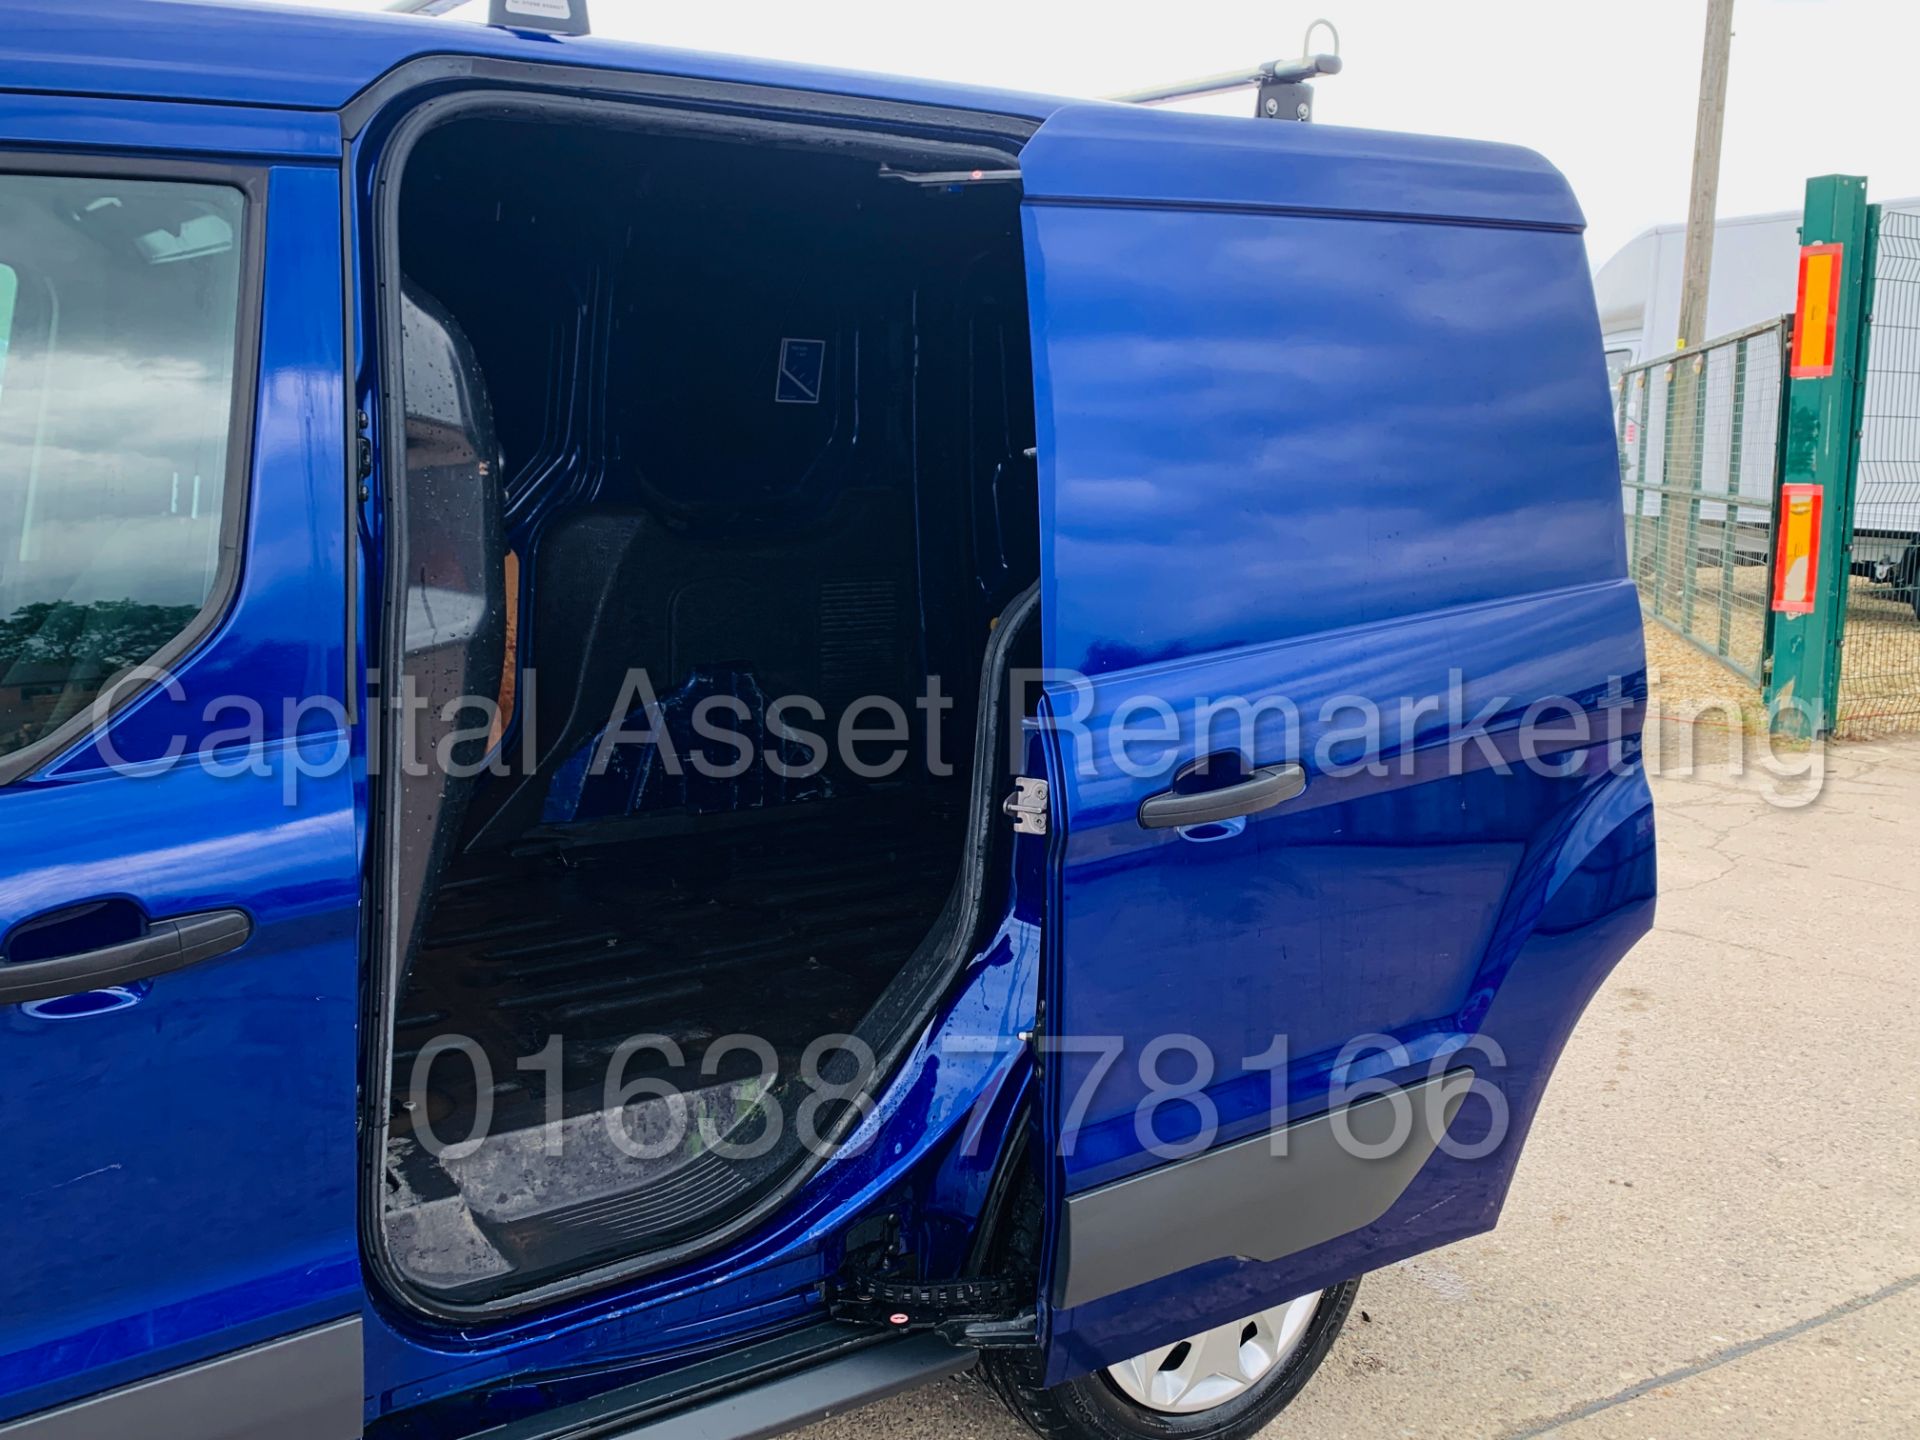 (On Sale) FORD TRANSIT CONNECT *TREND* SWB (2017 - EURO 6 VERSION) '1.5 TDCI - 100 BHP' (1 OWNER) - Image 23 of 39